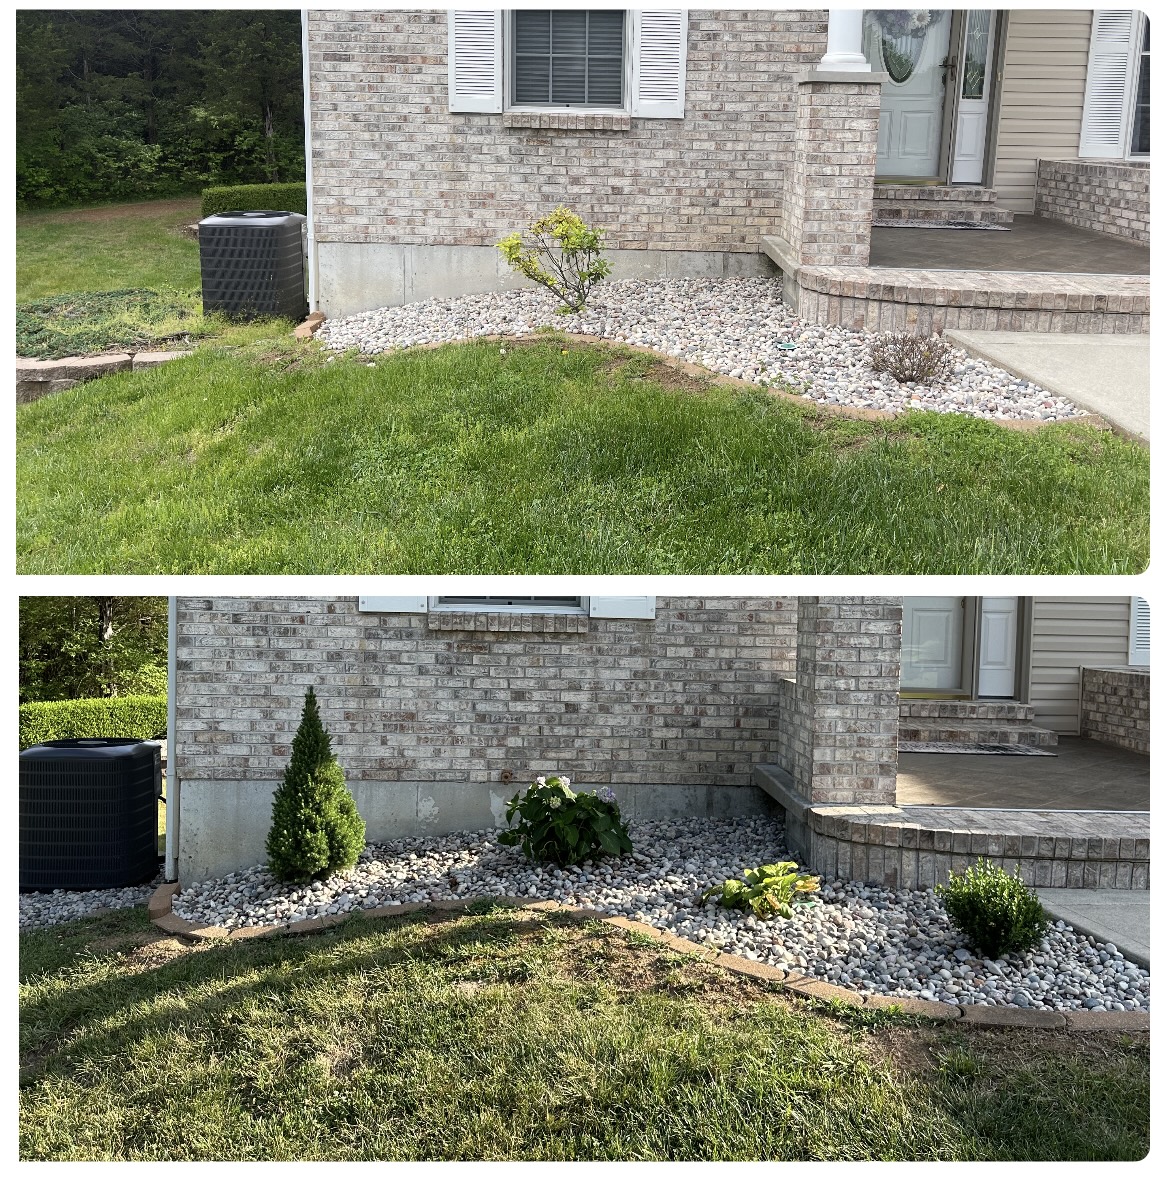 New Landscape Design Service Performed in Foristell, MO